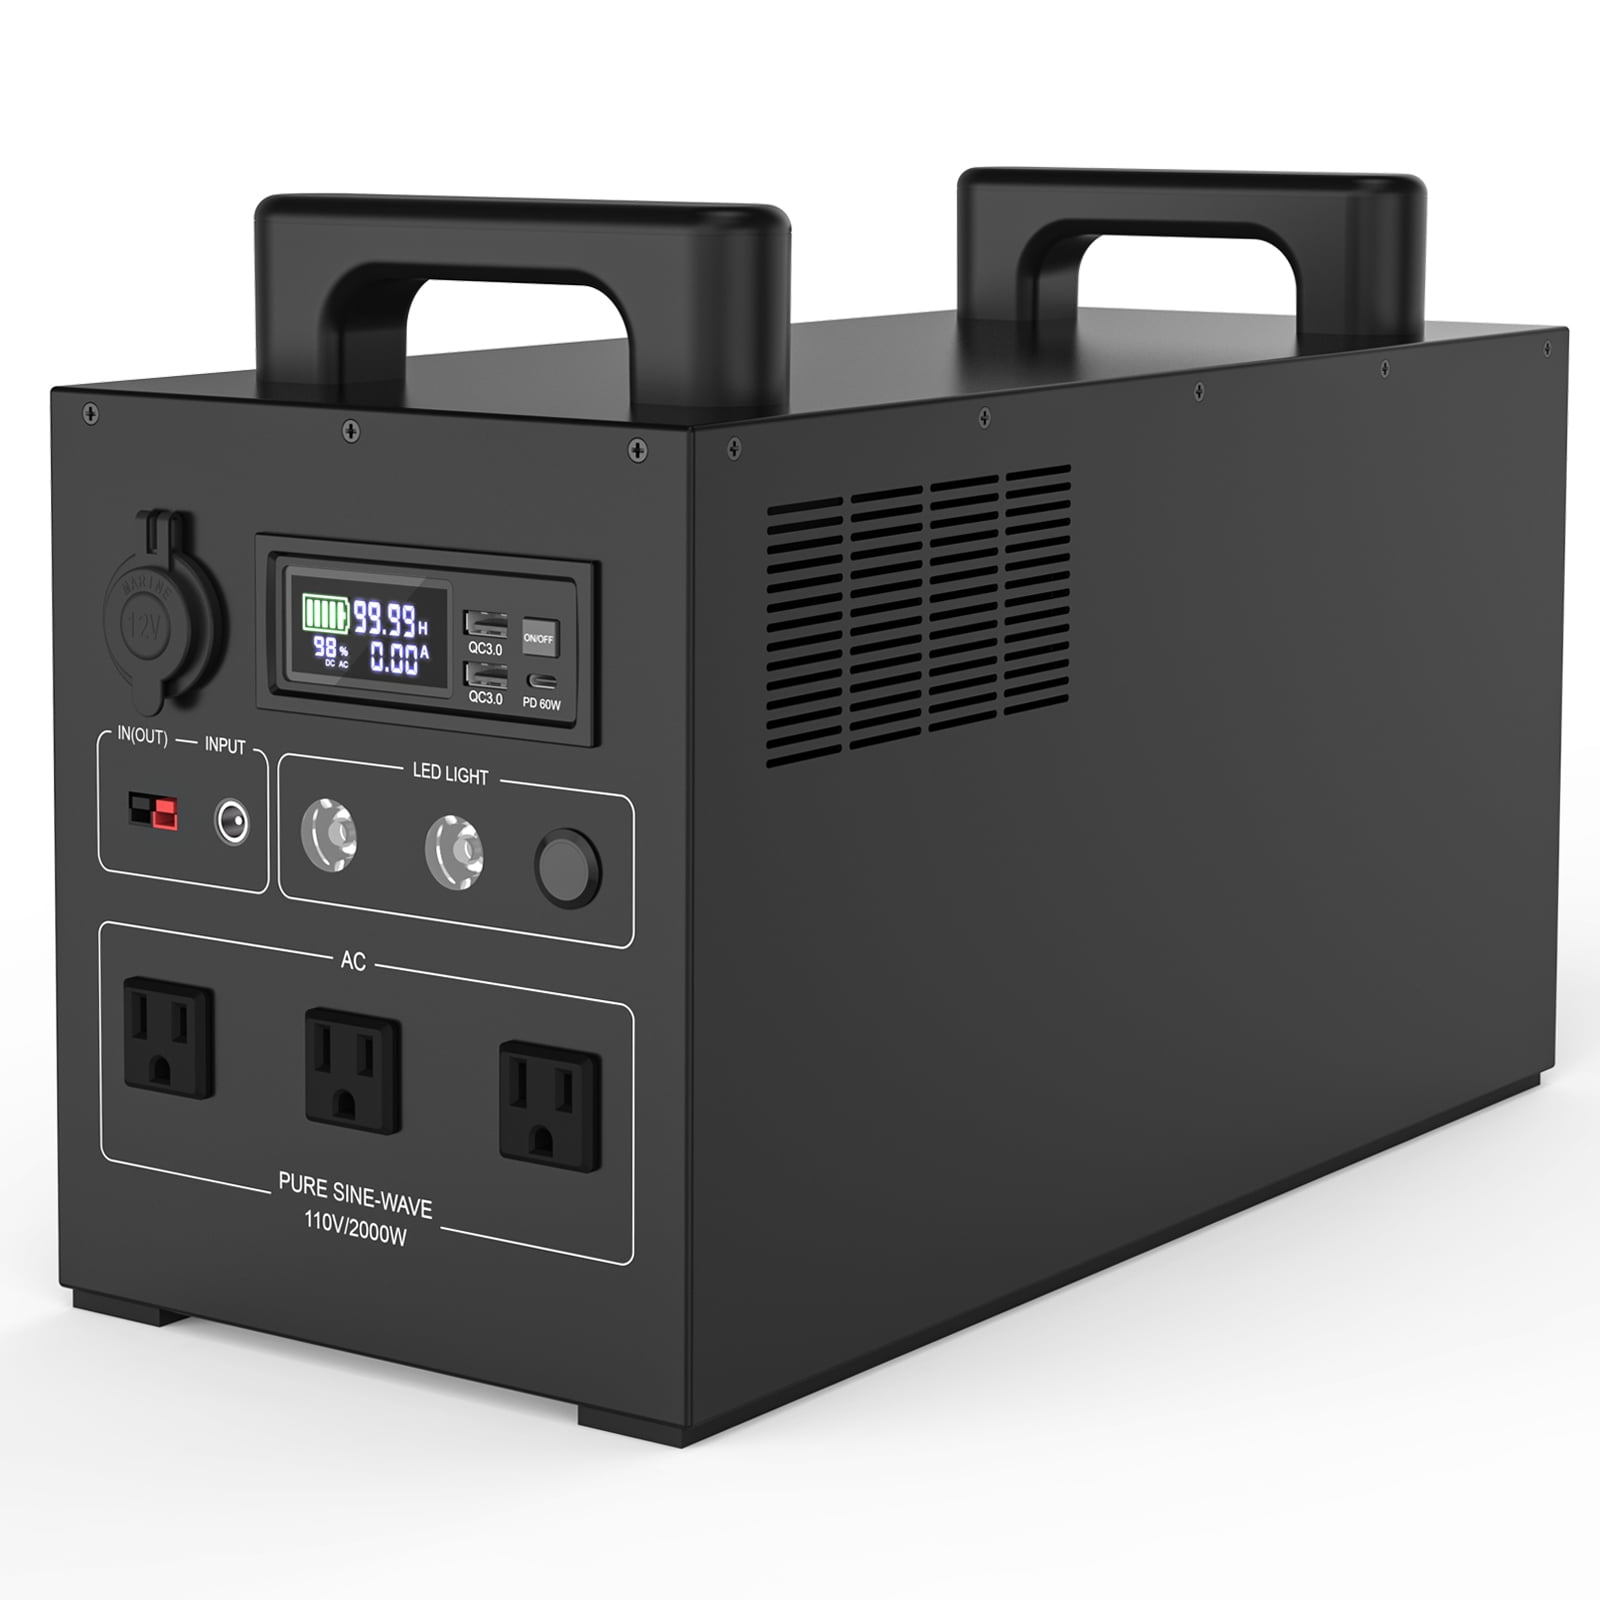 Newpowa Portable Solar Generator 700W Backup Lithium Battery Power Station,  537Wh LiFePo4 Powerbank AC 120V Outlet DC Wireless Charging, Pure Sine